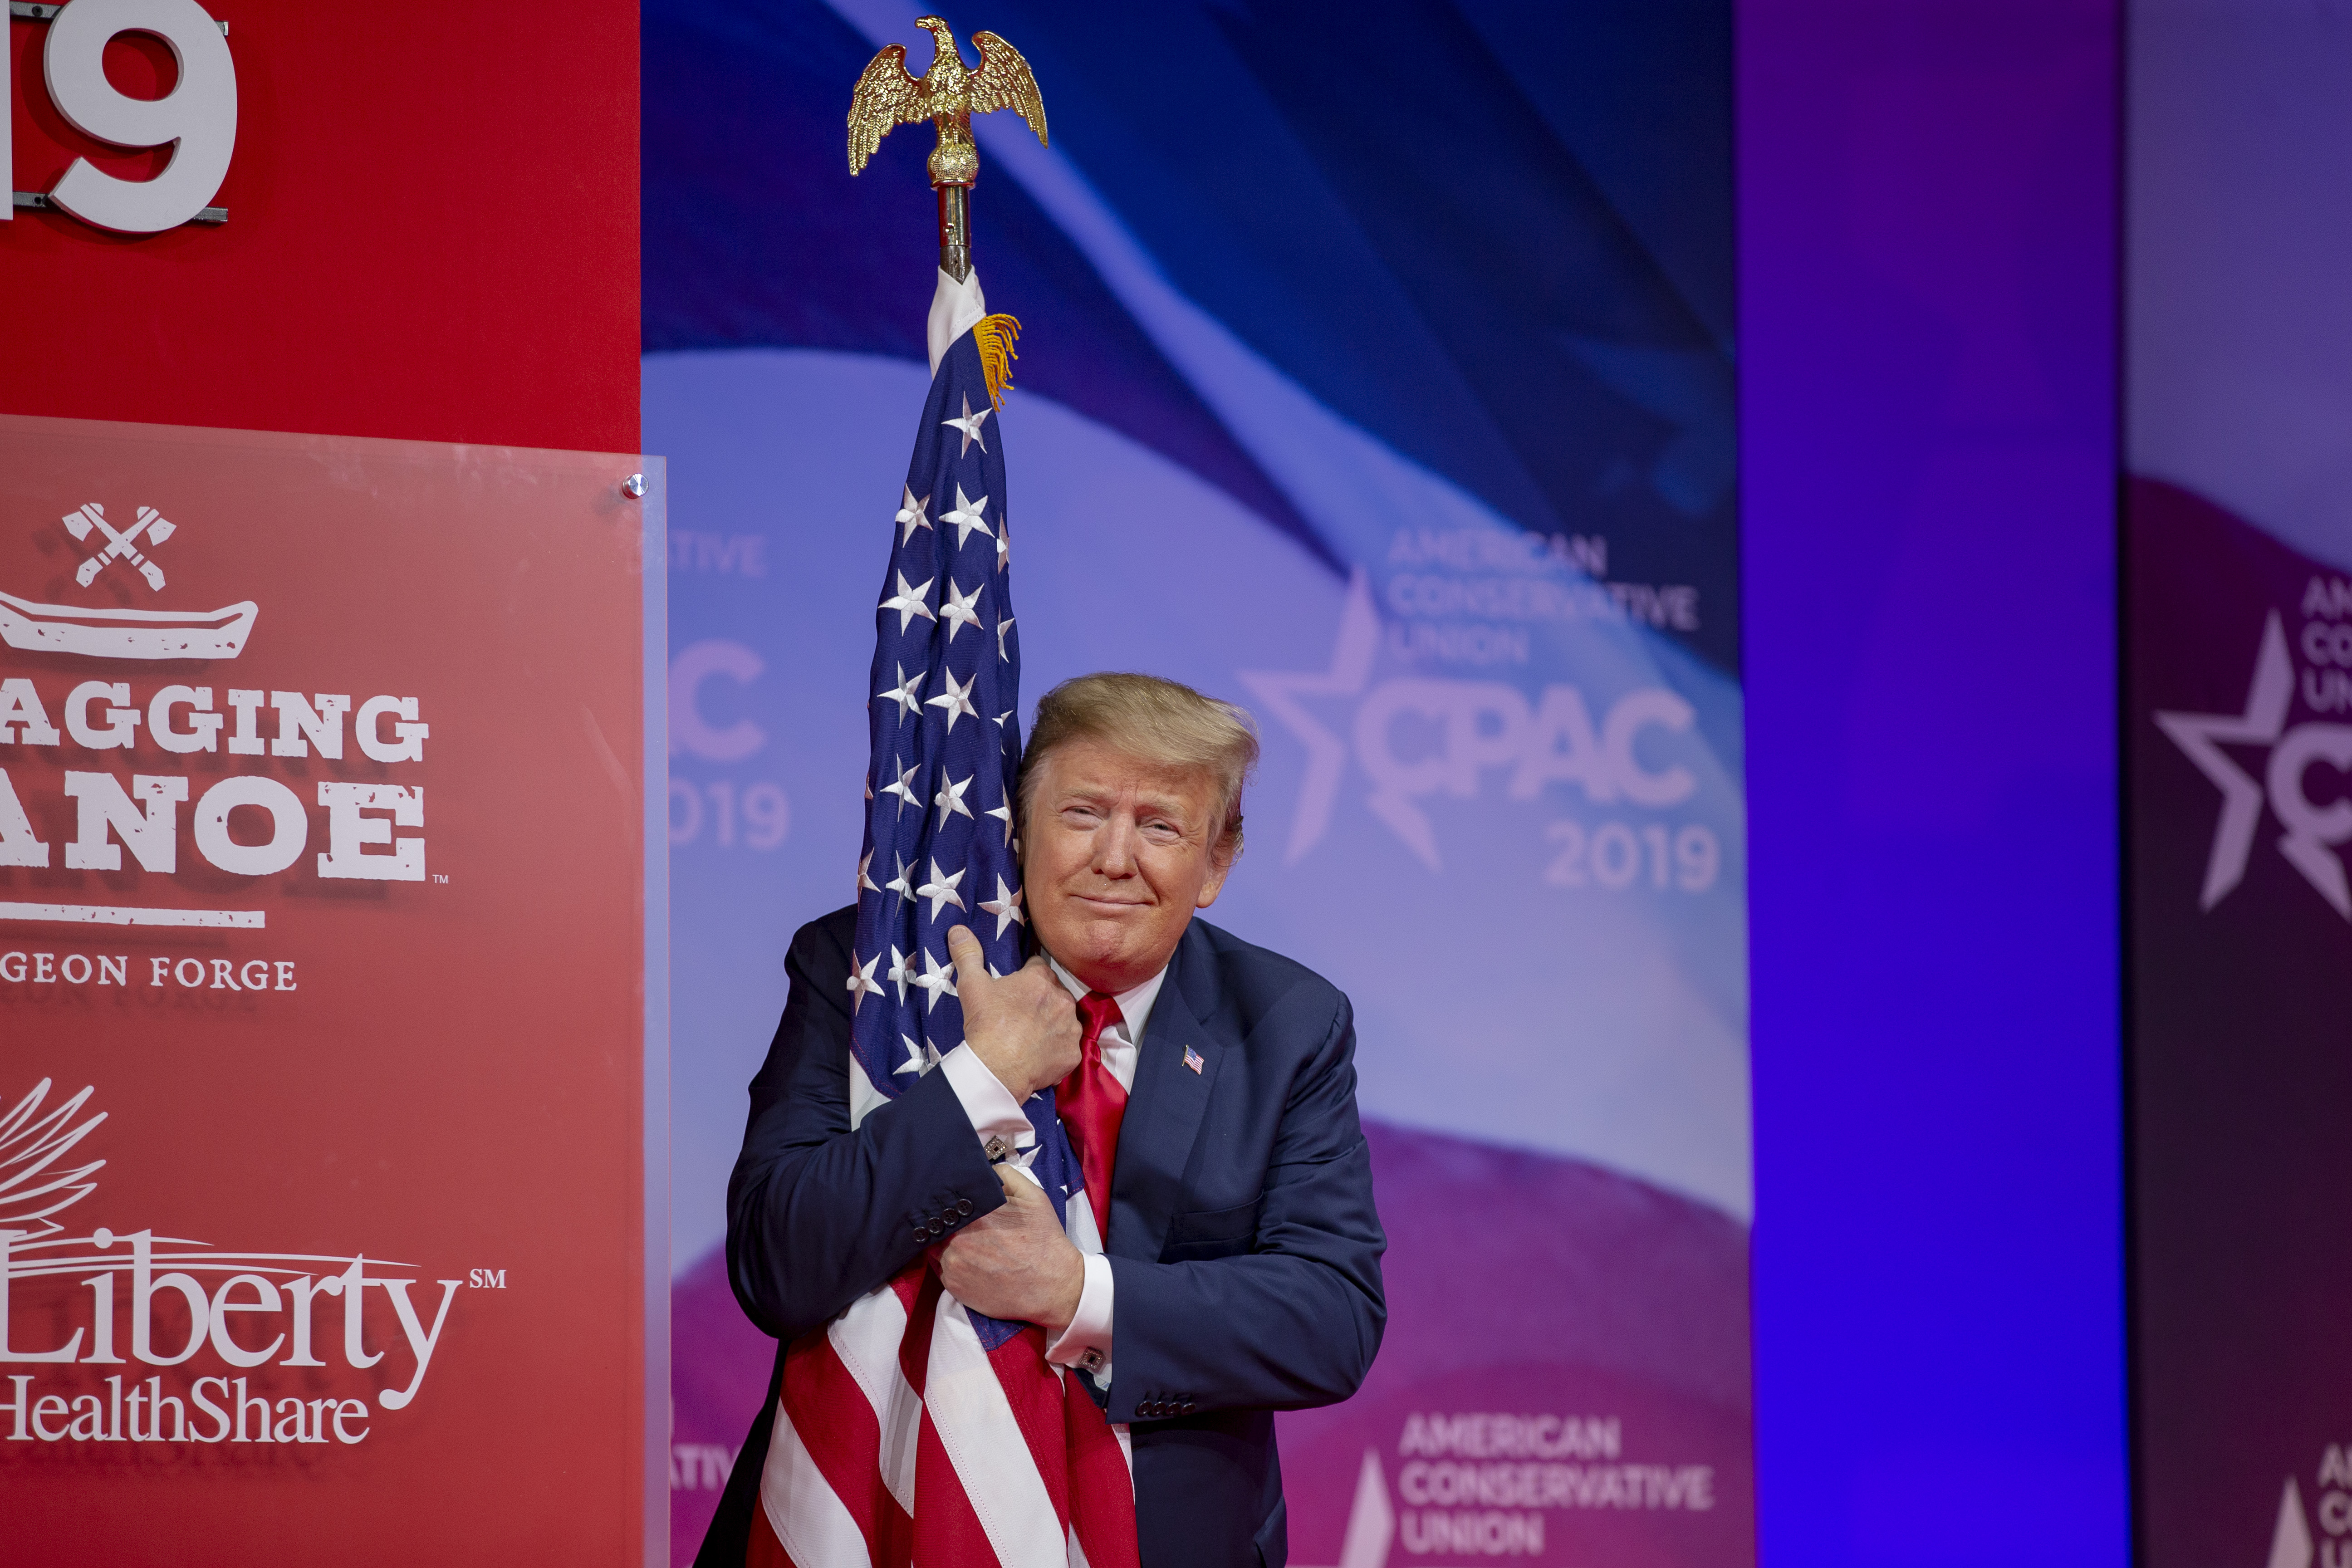 President Trump hugs the American flag as he walked on stage at the 2019 Conservative Political Action Conference (CPAC), March 2, 2019.